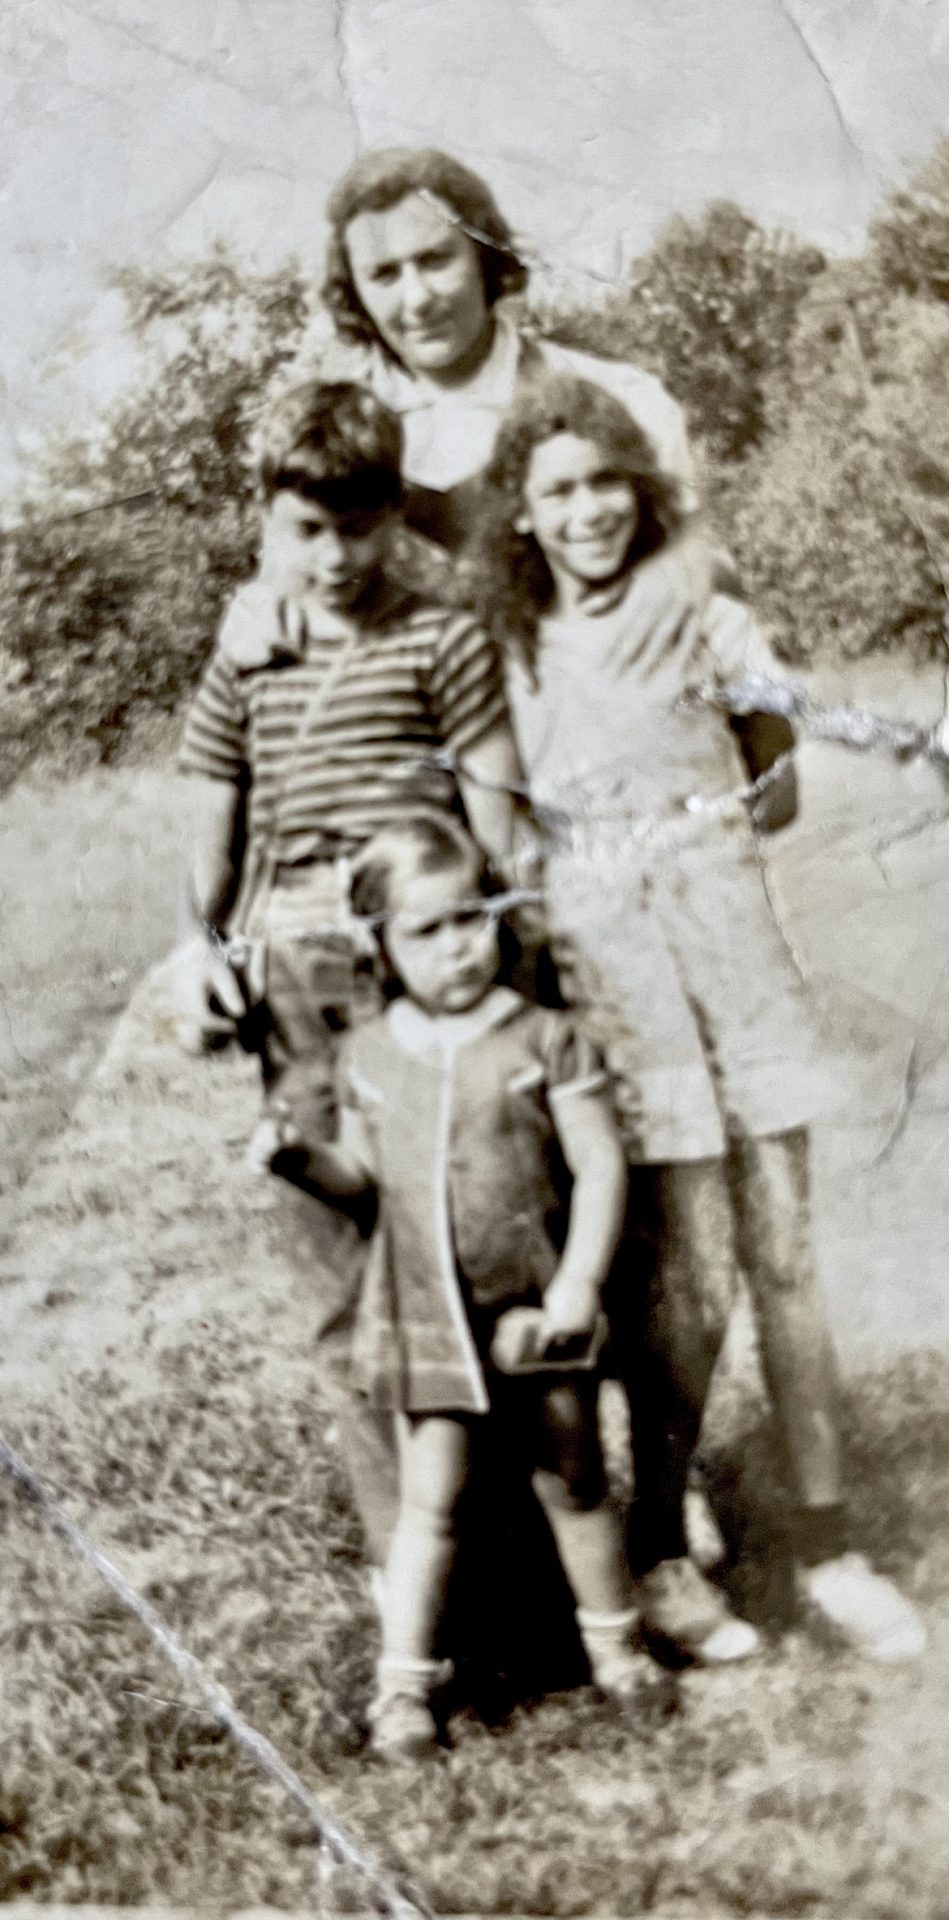 Baby Judy with mother Irene, brother Ralph, and sister Mildred (Cookee) — Budd Lake, New Jersey, 1939